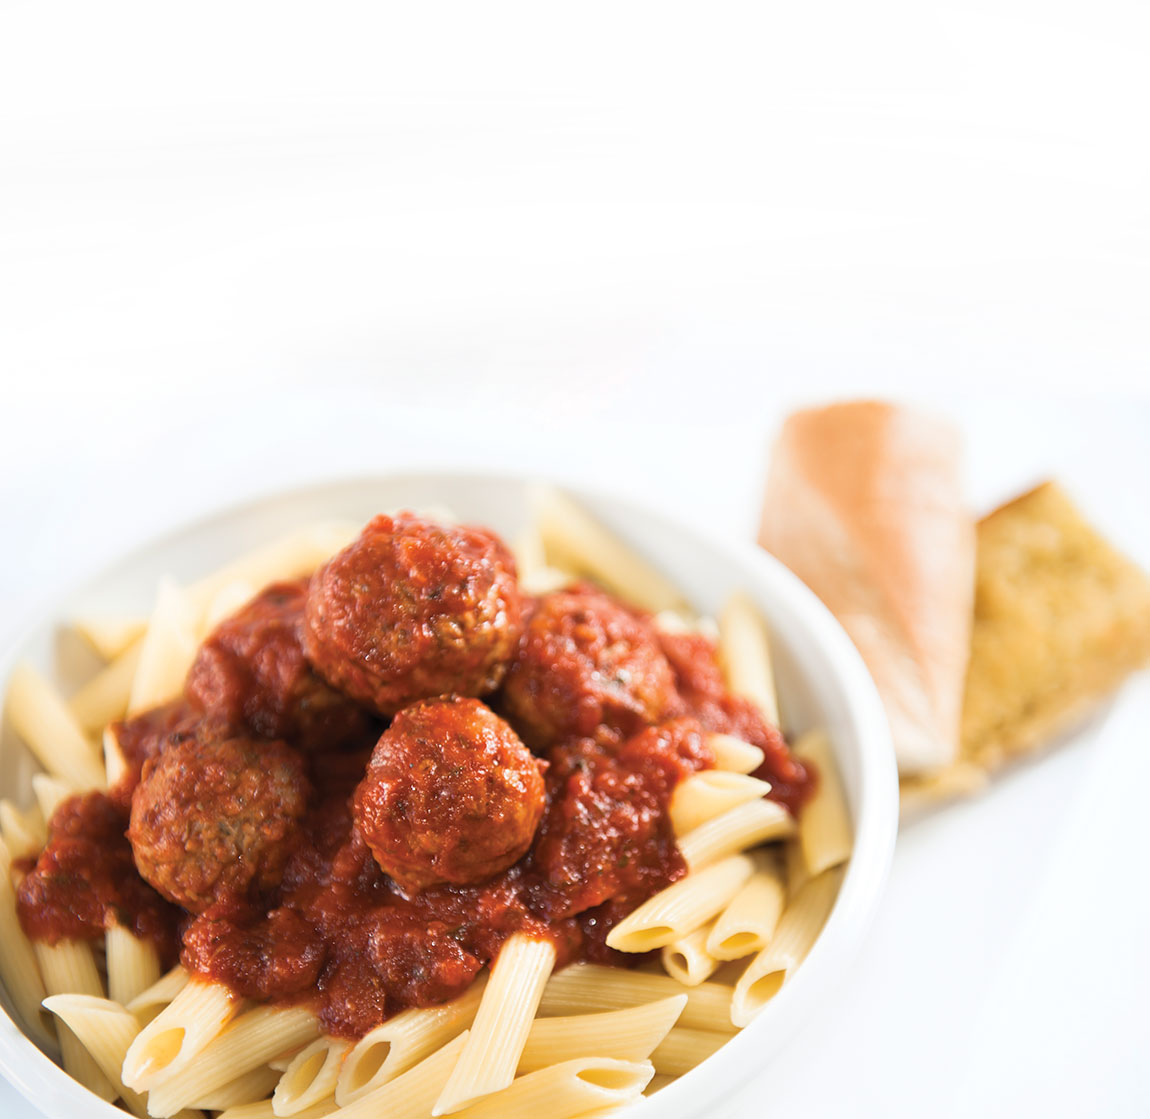 Pasta and meatballs in a bowl.